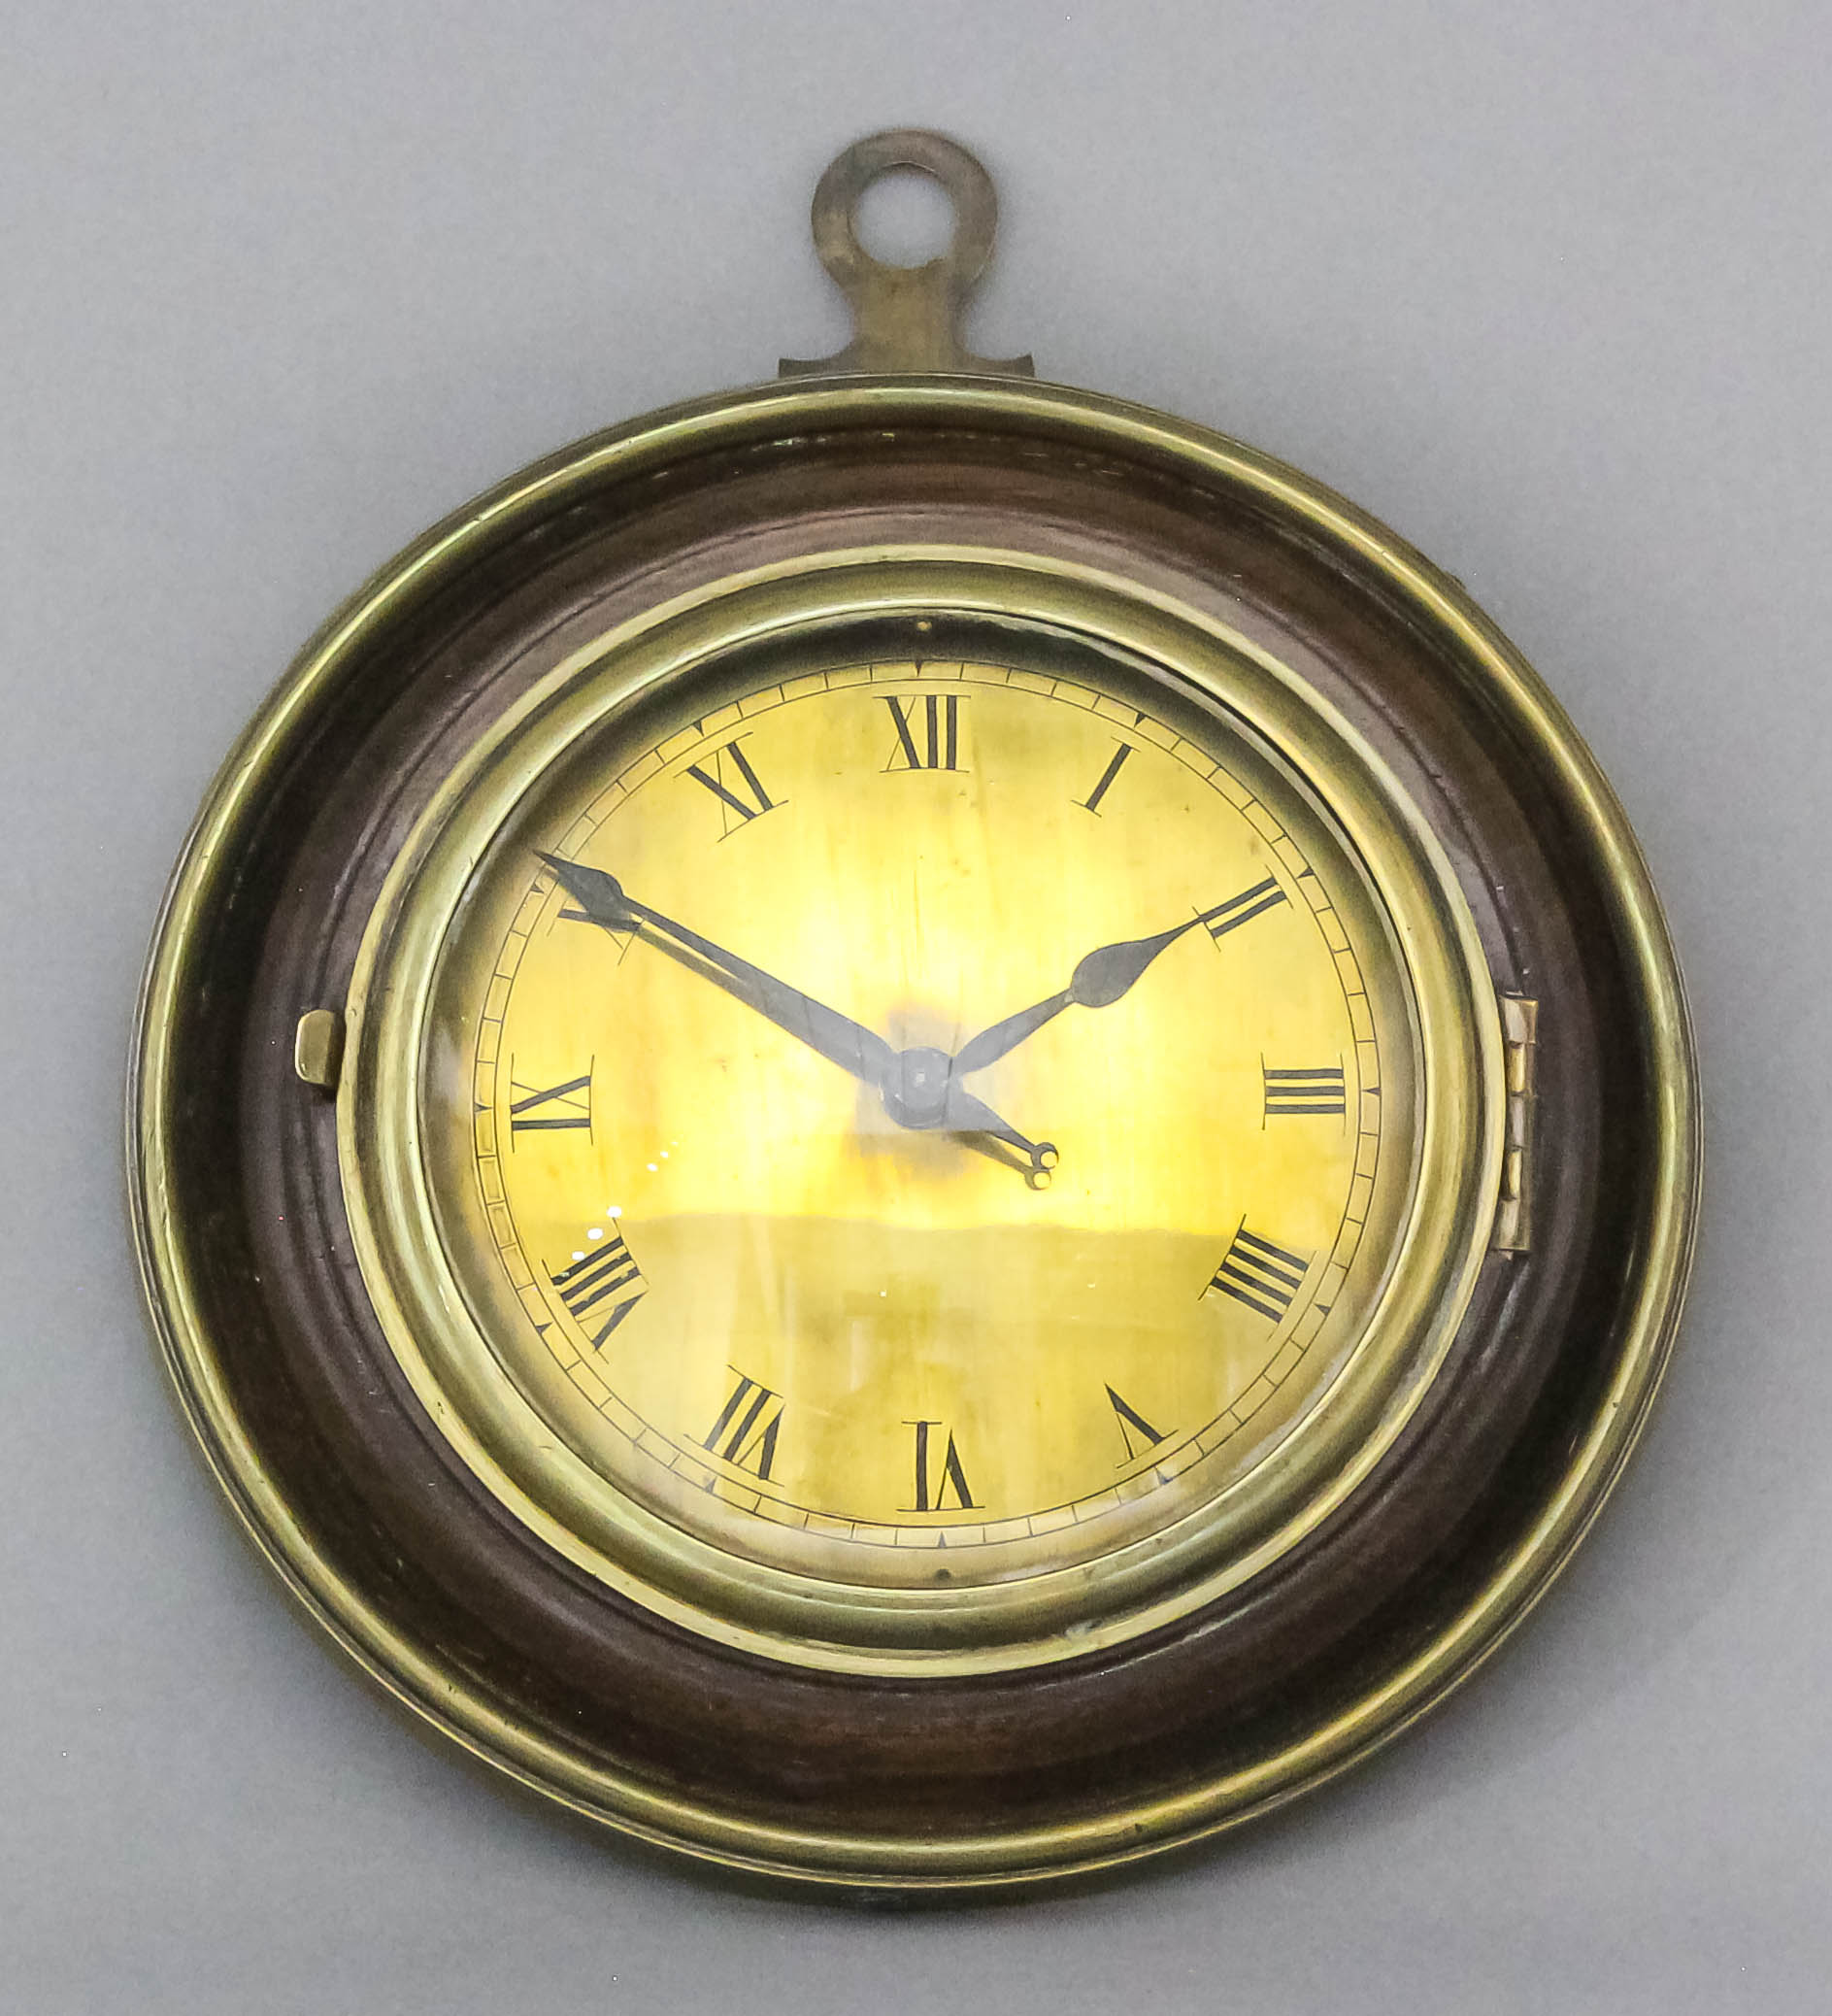 A mahogany and brass mounted circular "Sedan" clock, the 3.875ins diameter brass dial with Roman